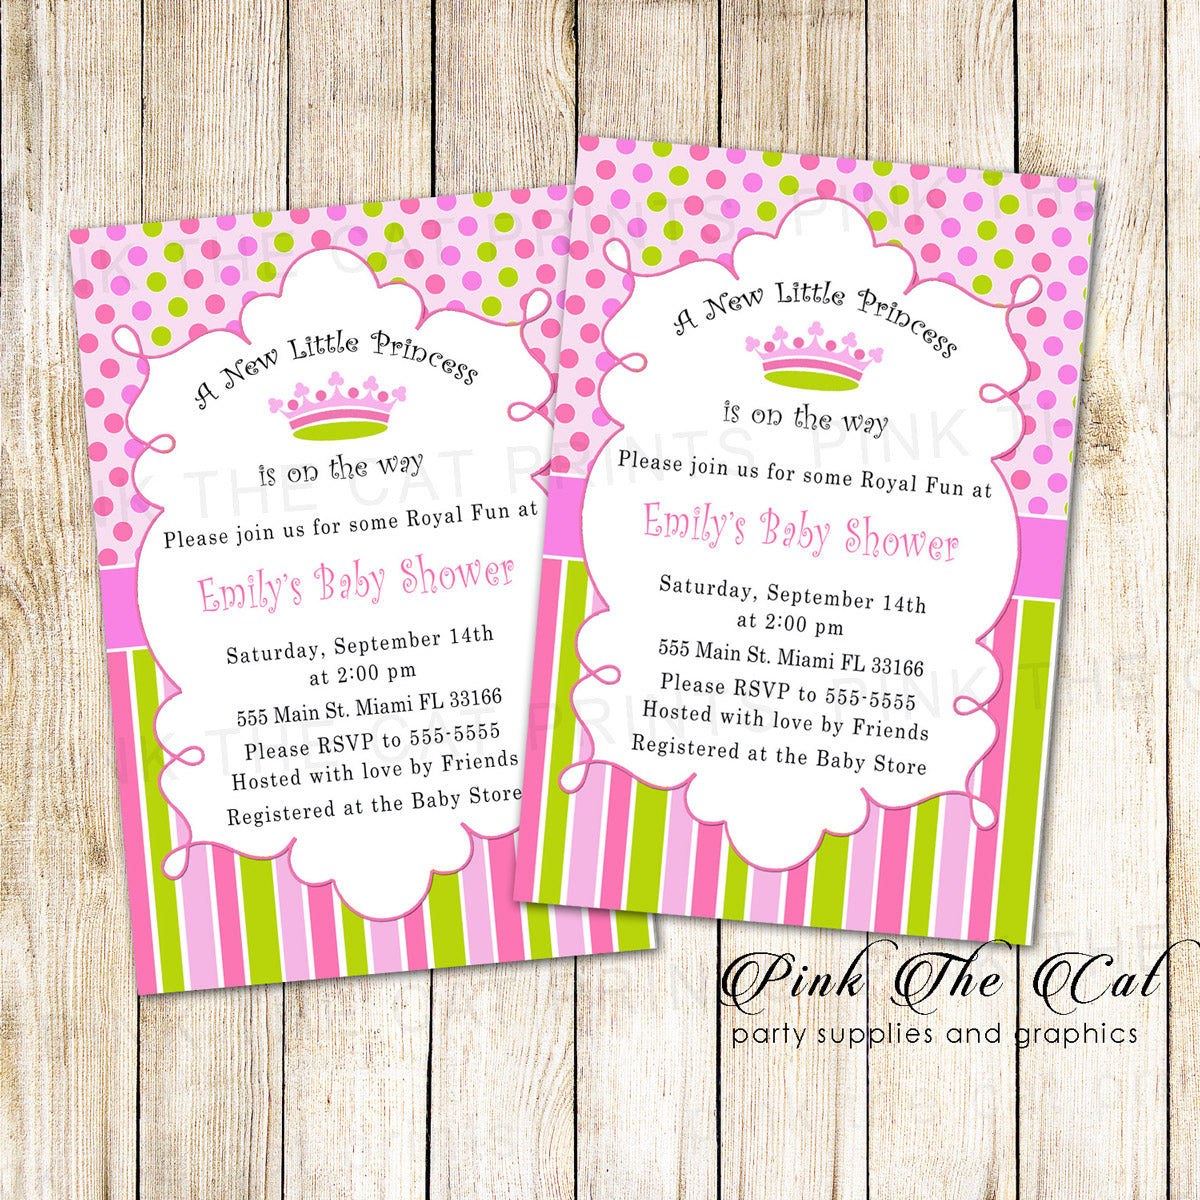 New Little Princess Baby Shower Invitation Card Pink Green